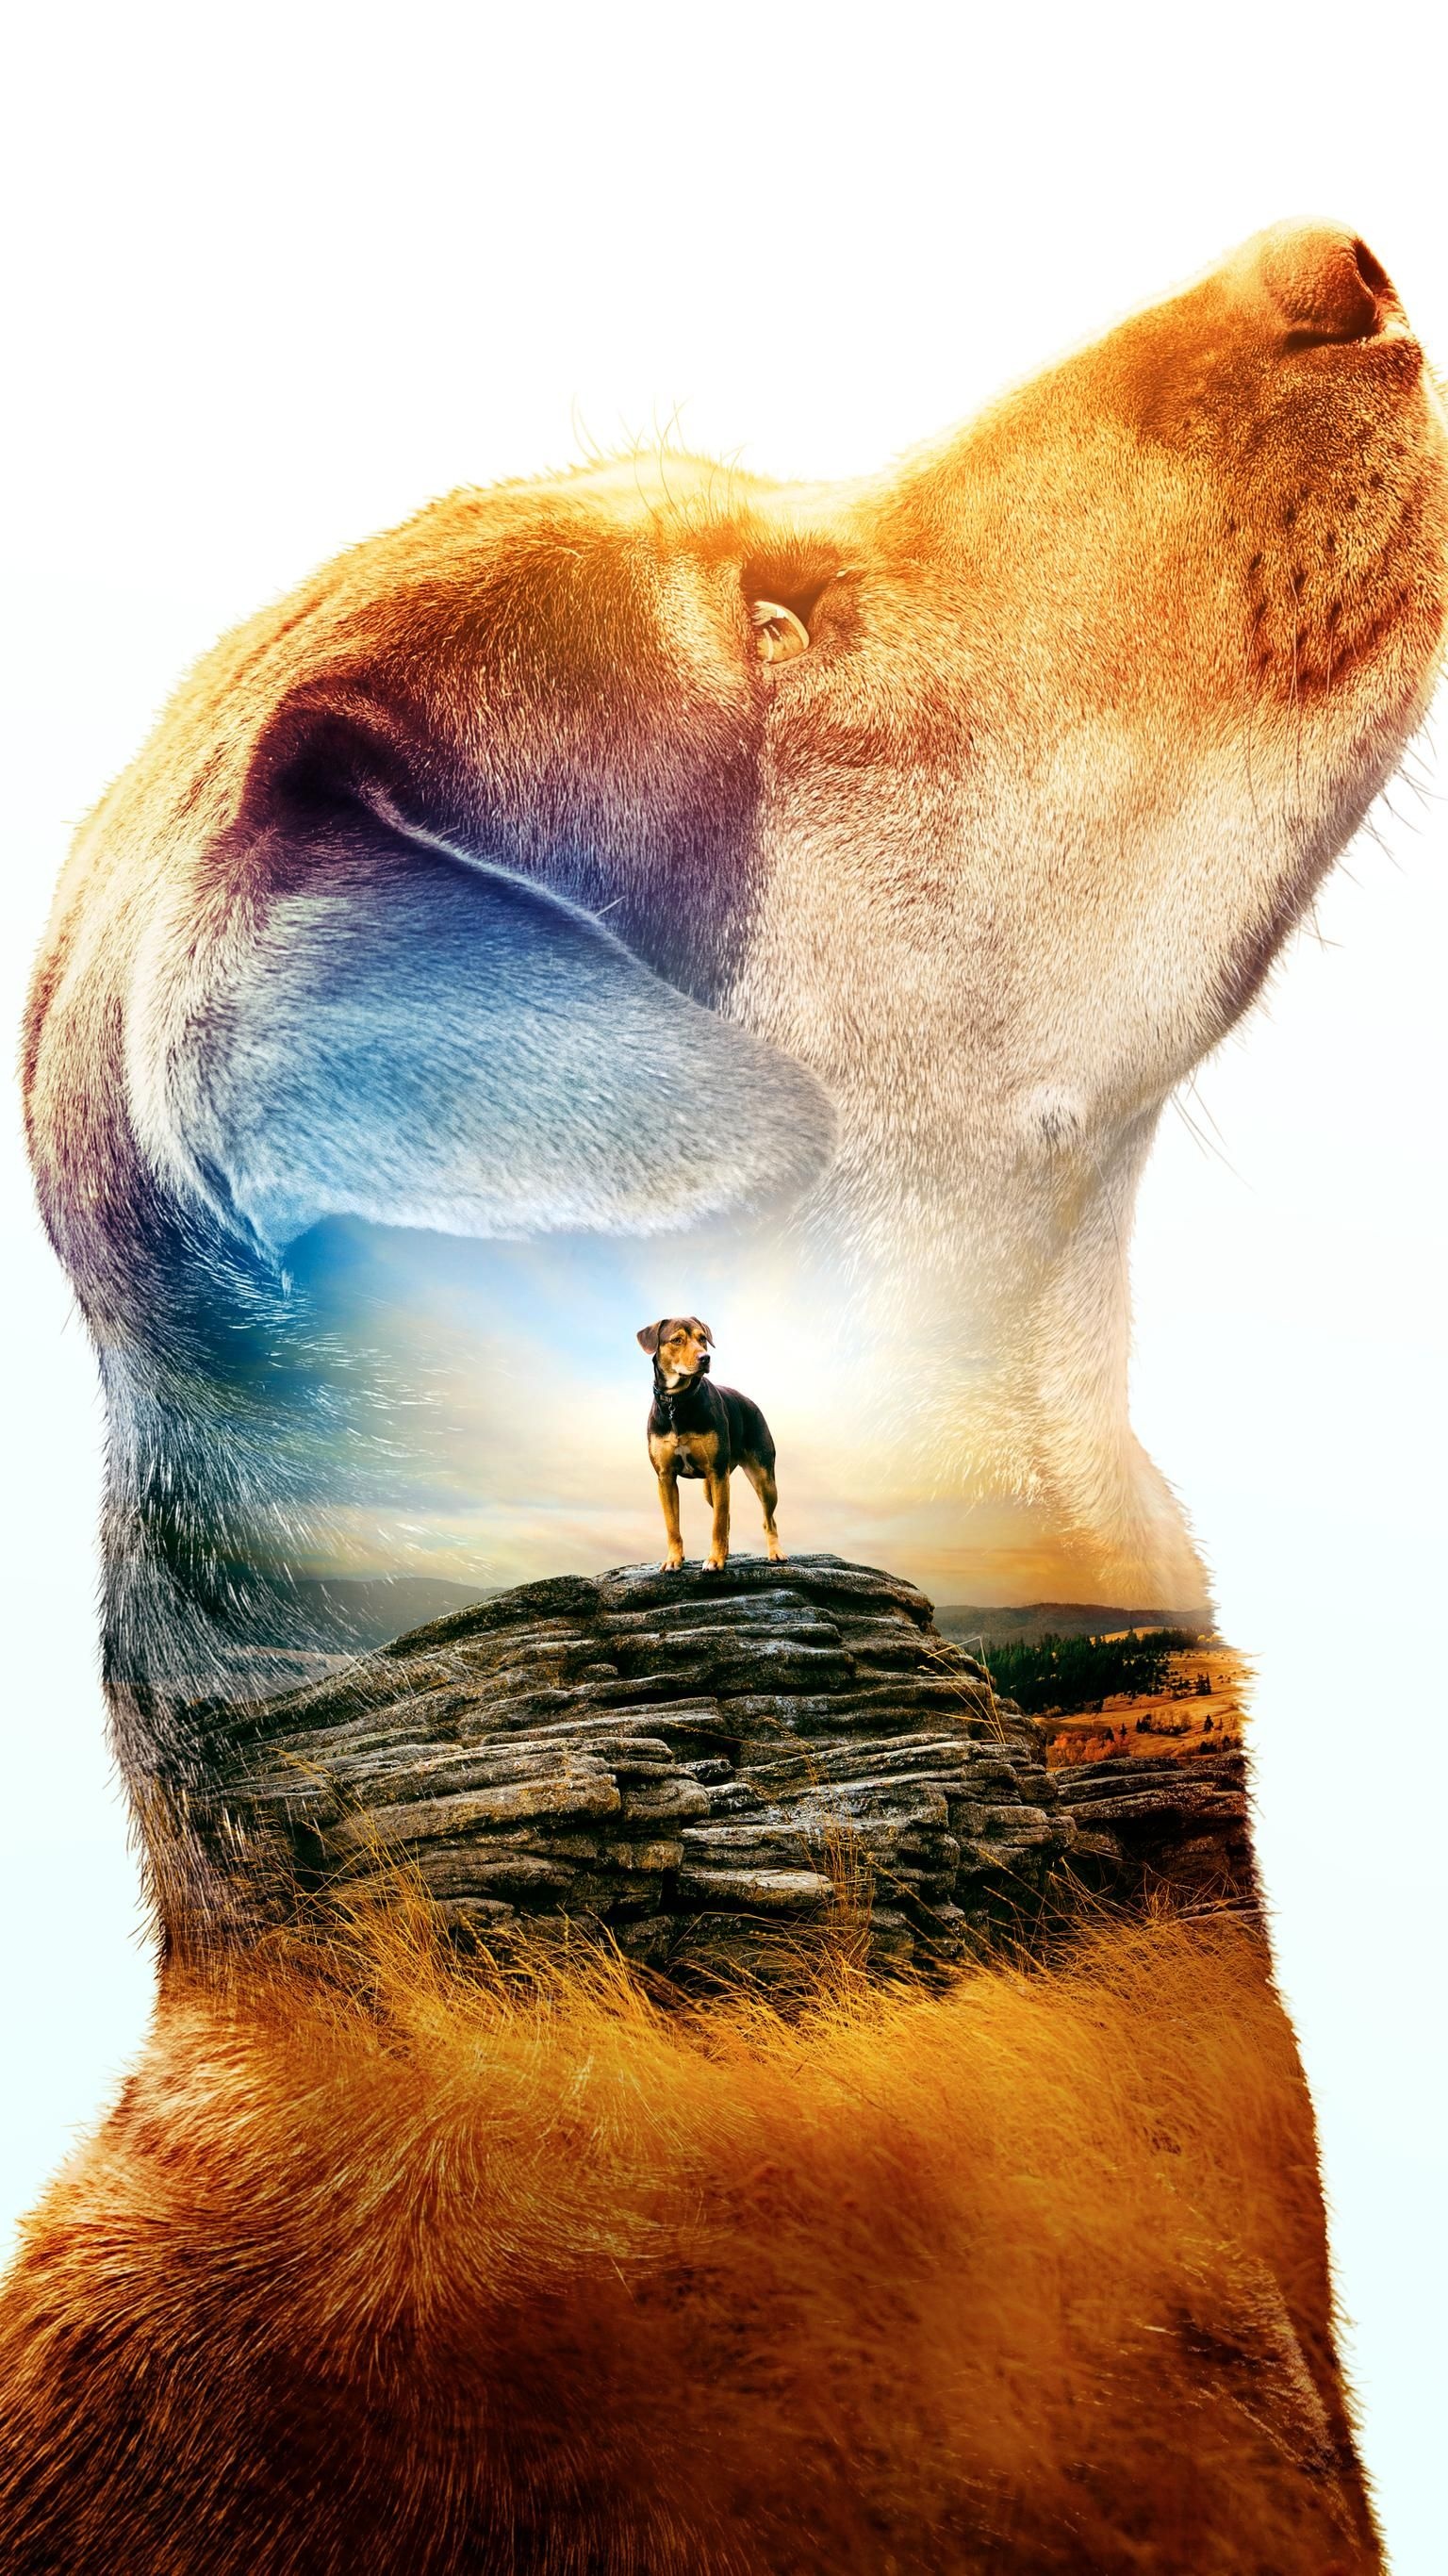 Animal movie recommendations, Heartwarming family films, Movie inspiration, Feel-good stories, 1540x2740 HD Phone